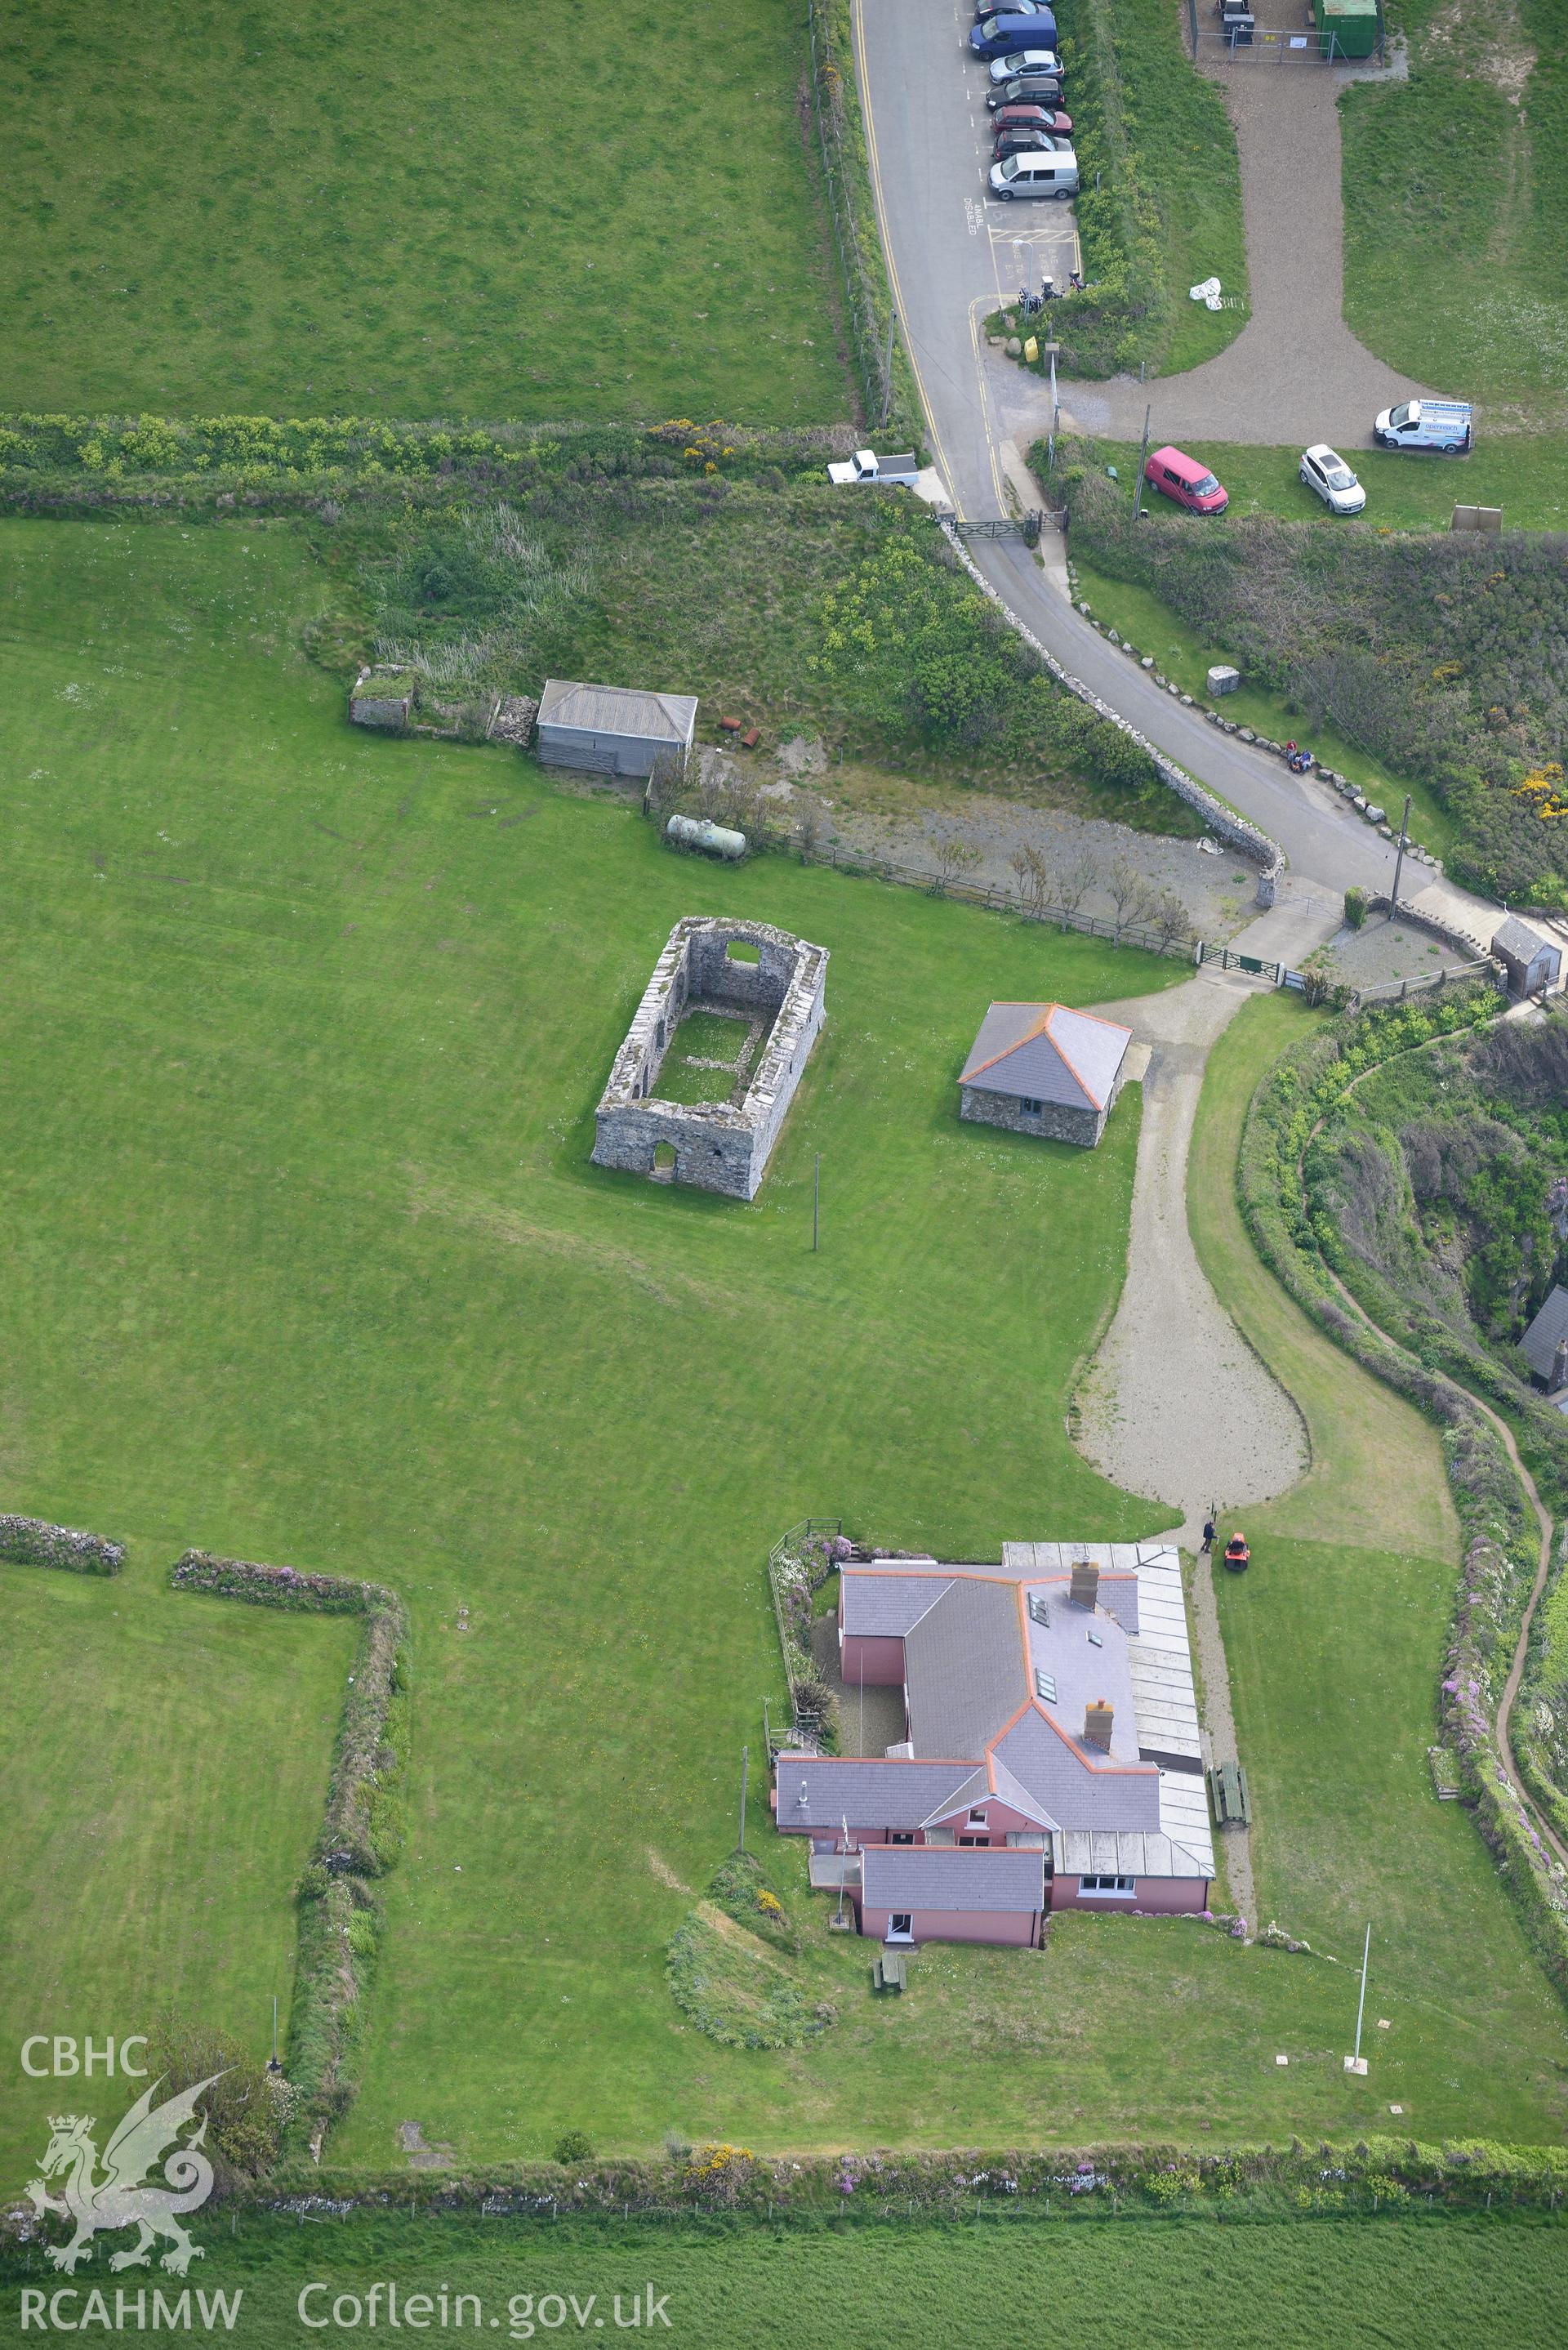 St. Justinian's bungalow and the remains of St. Justinian's chapel. Oblique aerial photograph taken during the Royal Commission's programme of archaeological aerial reconnaissance by Toby Driver on 13th May 2015.